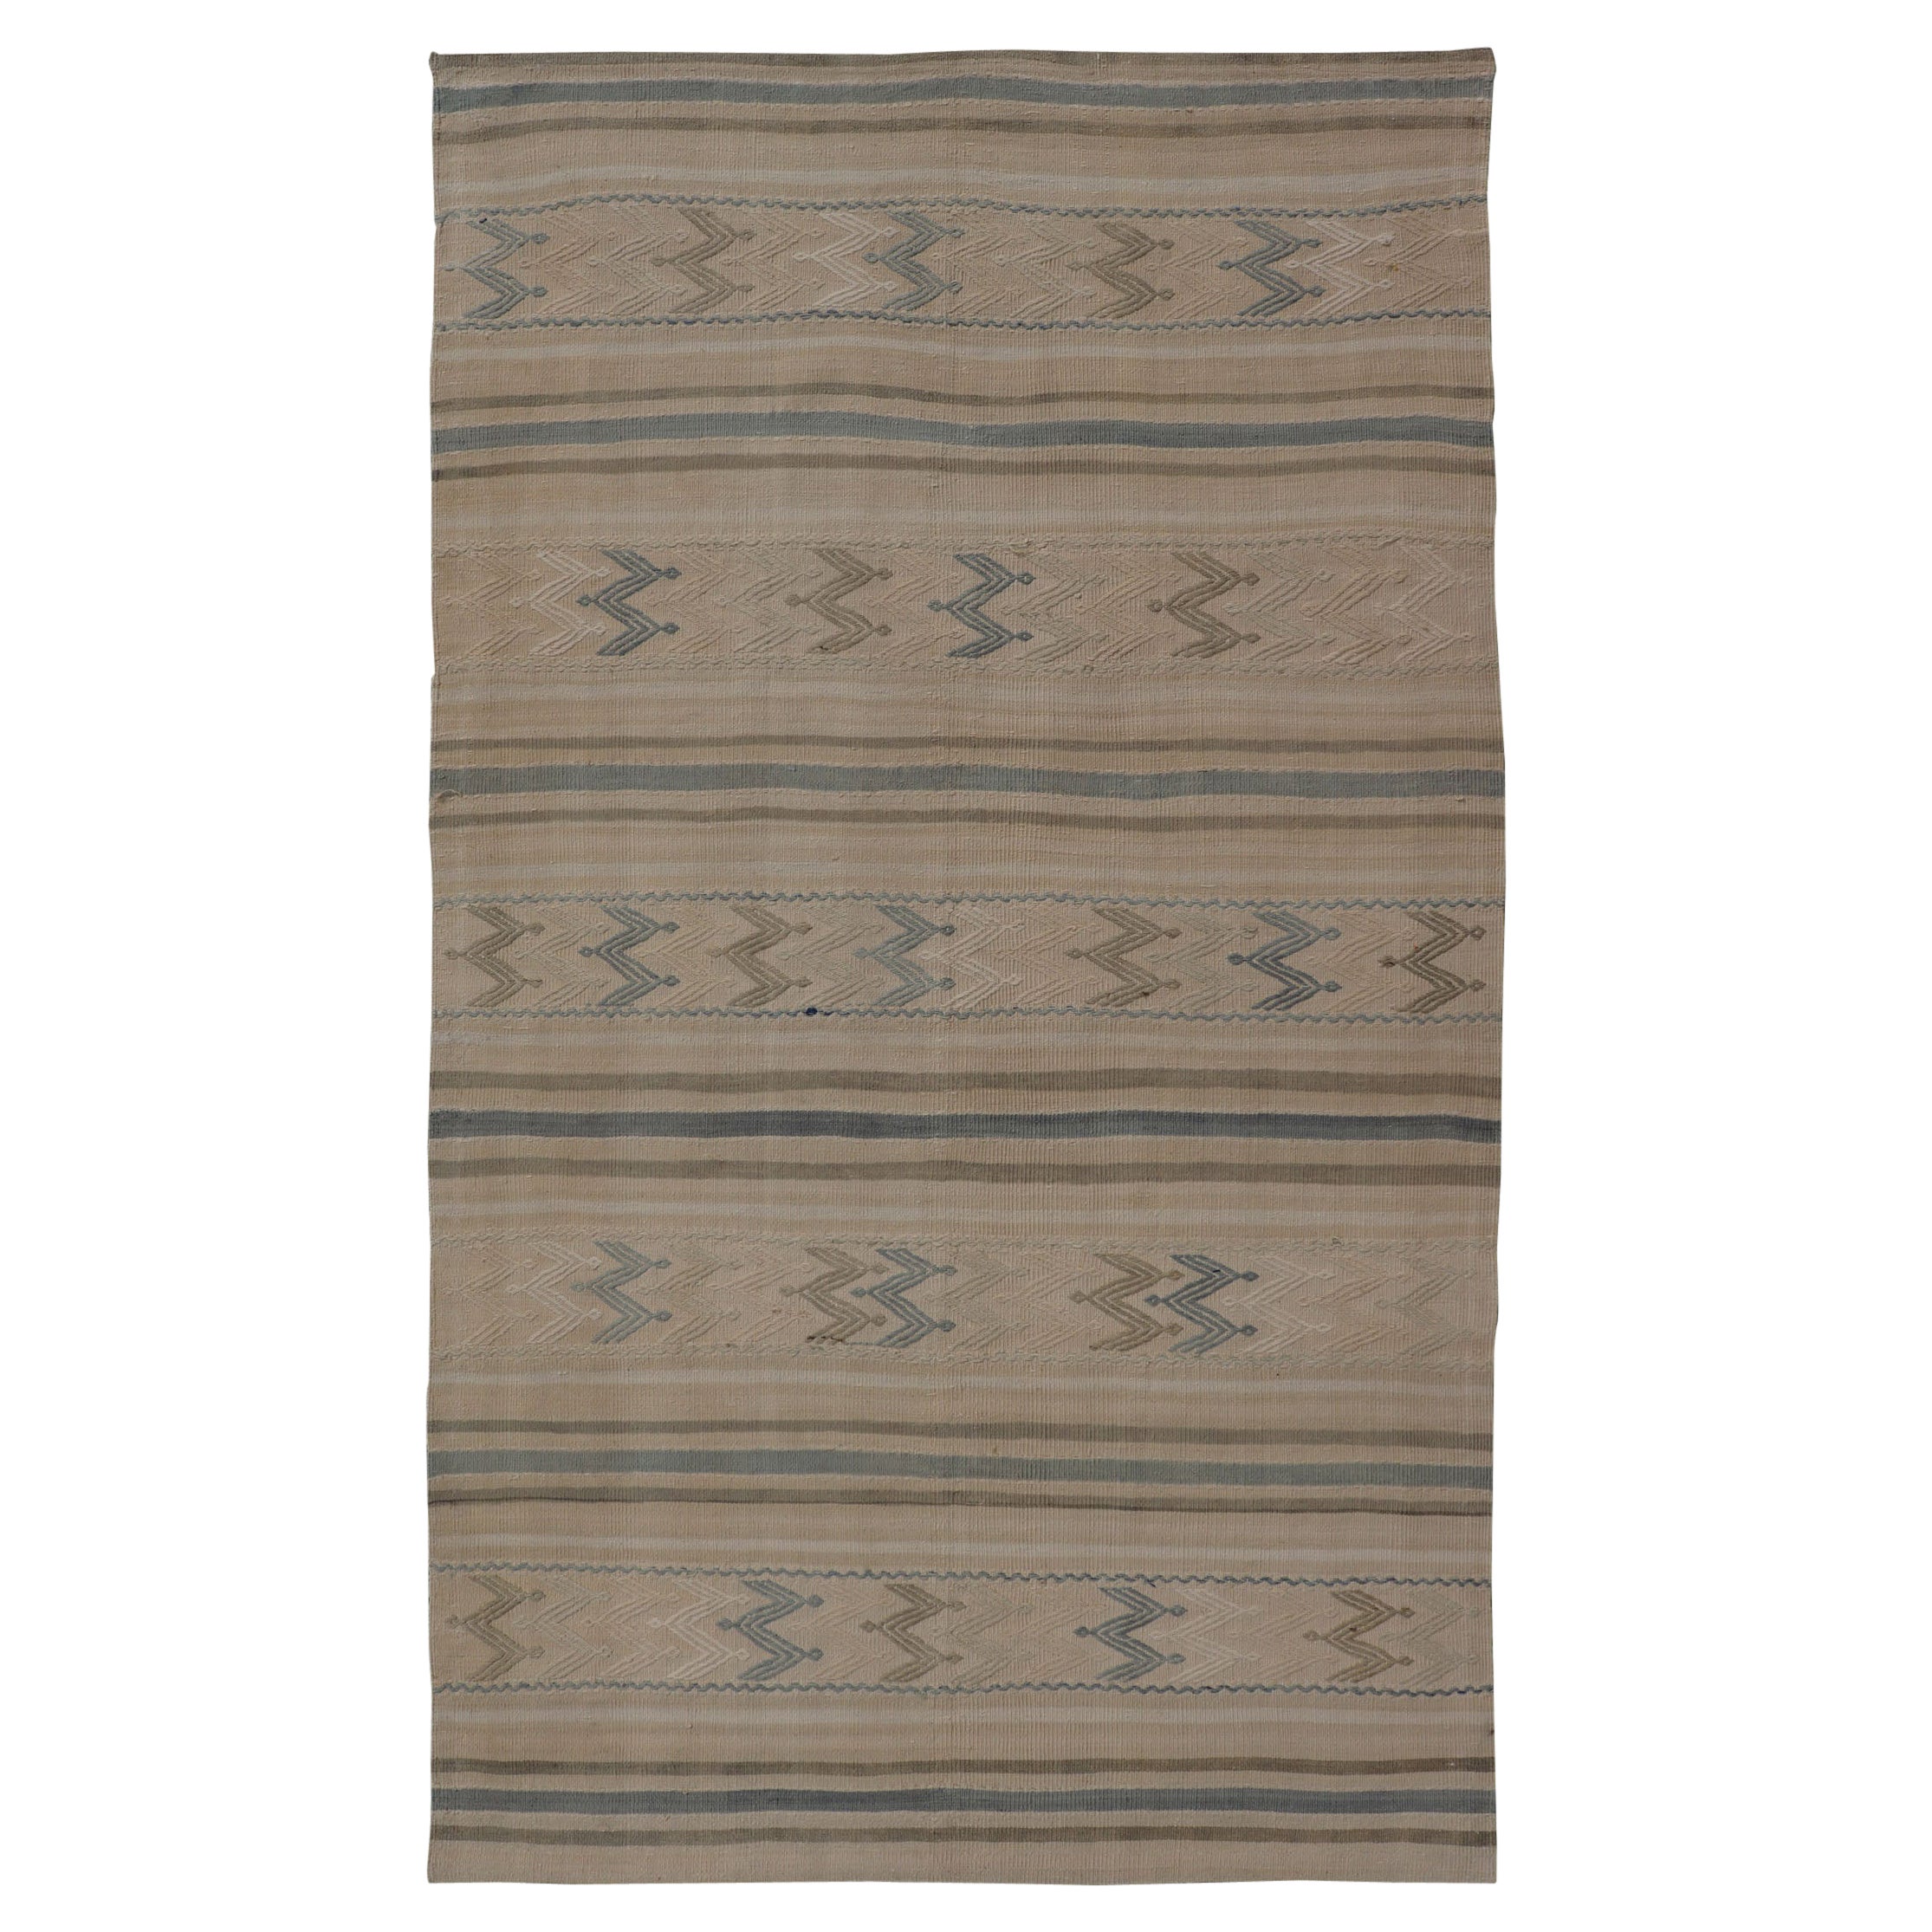 Vintage Turkish Flat-Weave with Embroideries in Earth Tones and Blue For Sale